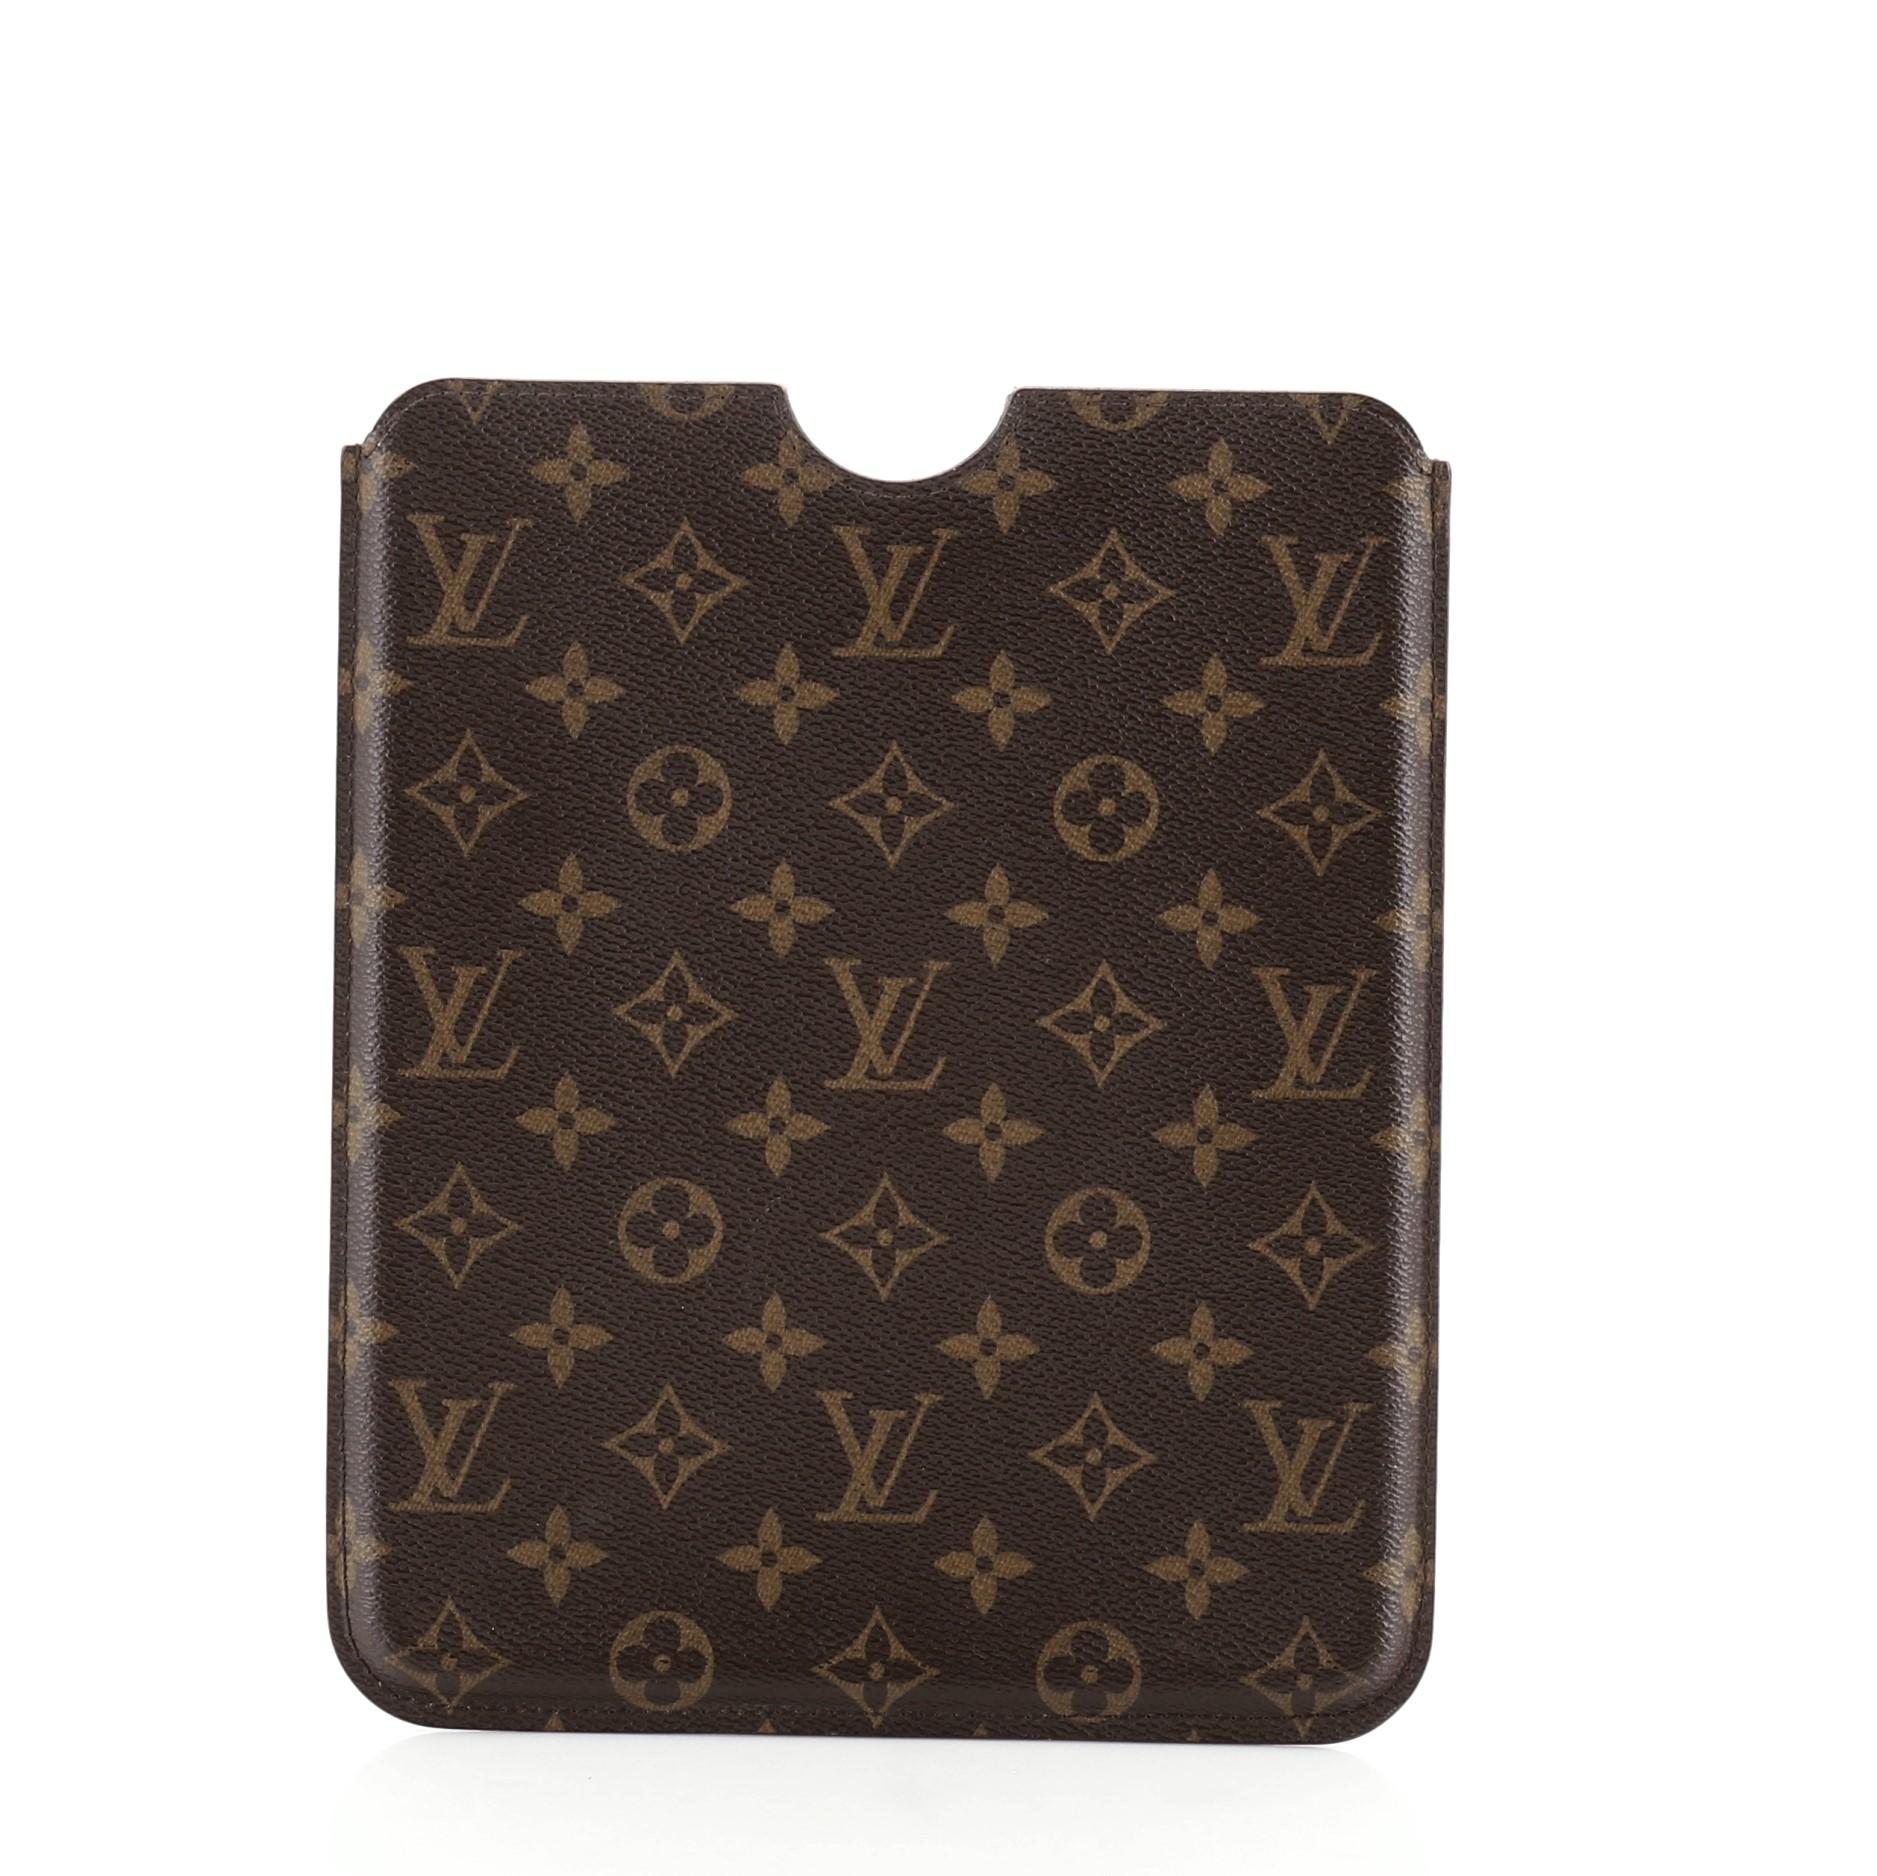 Louis Vuitton iPad Sleeve Monogram Canvas
Monogram

Condition Details: Splitting and peeling on base and opening trim wax edges, moderate wear and small stains in interior.

50358MSC

Height 10